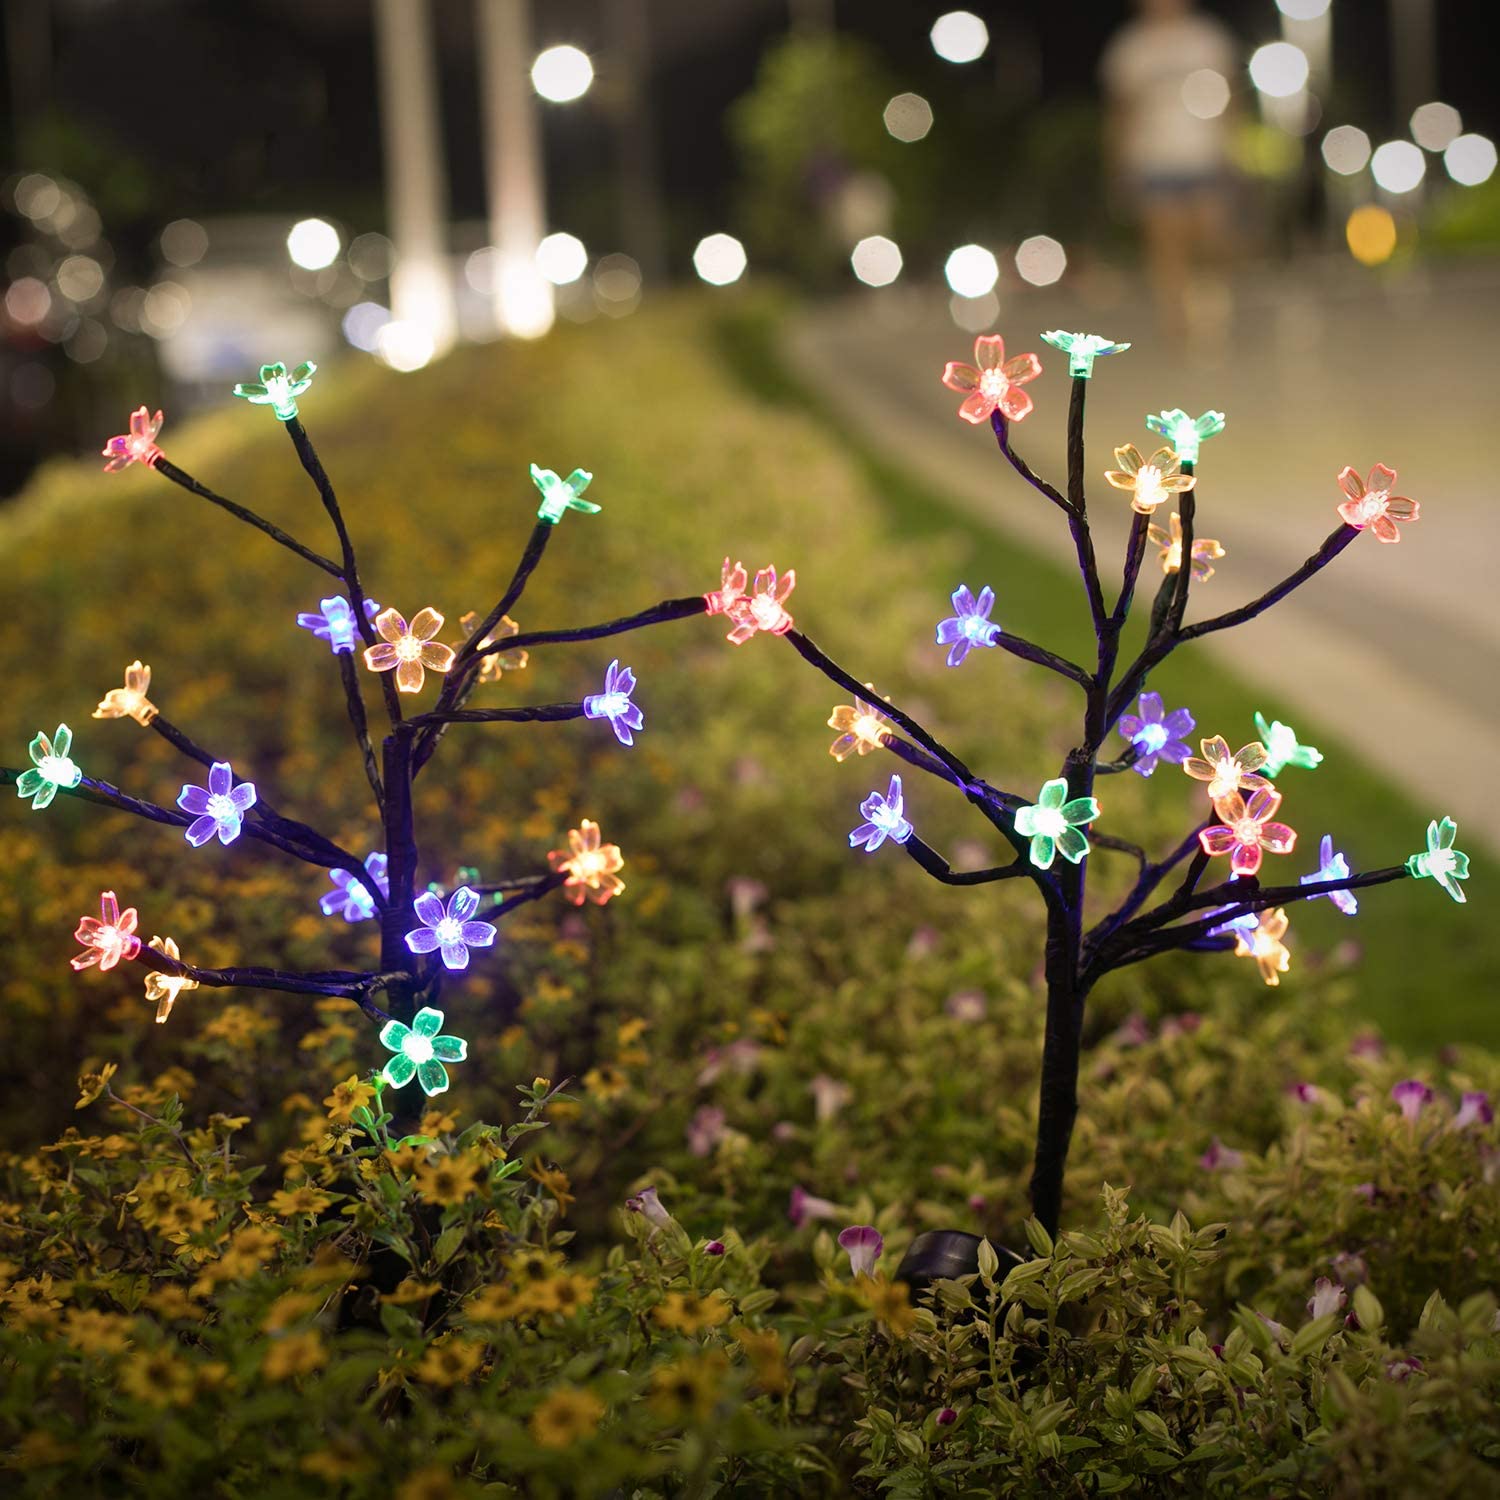 Solar Flower Lights with 20 Cherry Blossom,Outdoor Solar Lights, 2 Pack Solar Fairy Lights Waterproof Multi-Color Solar Powered Garden Lights, Bigger Solar Panel for Pathway Patio Yard Christmas Decor - image 1 of 8